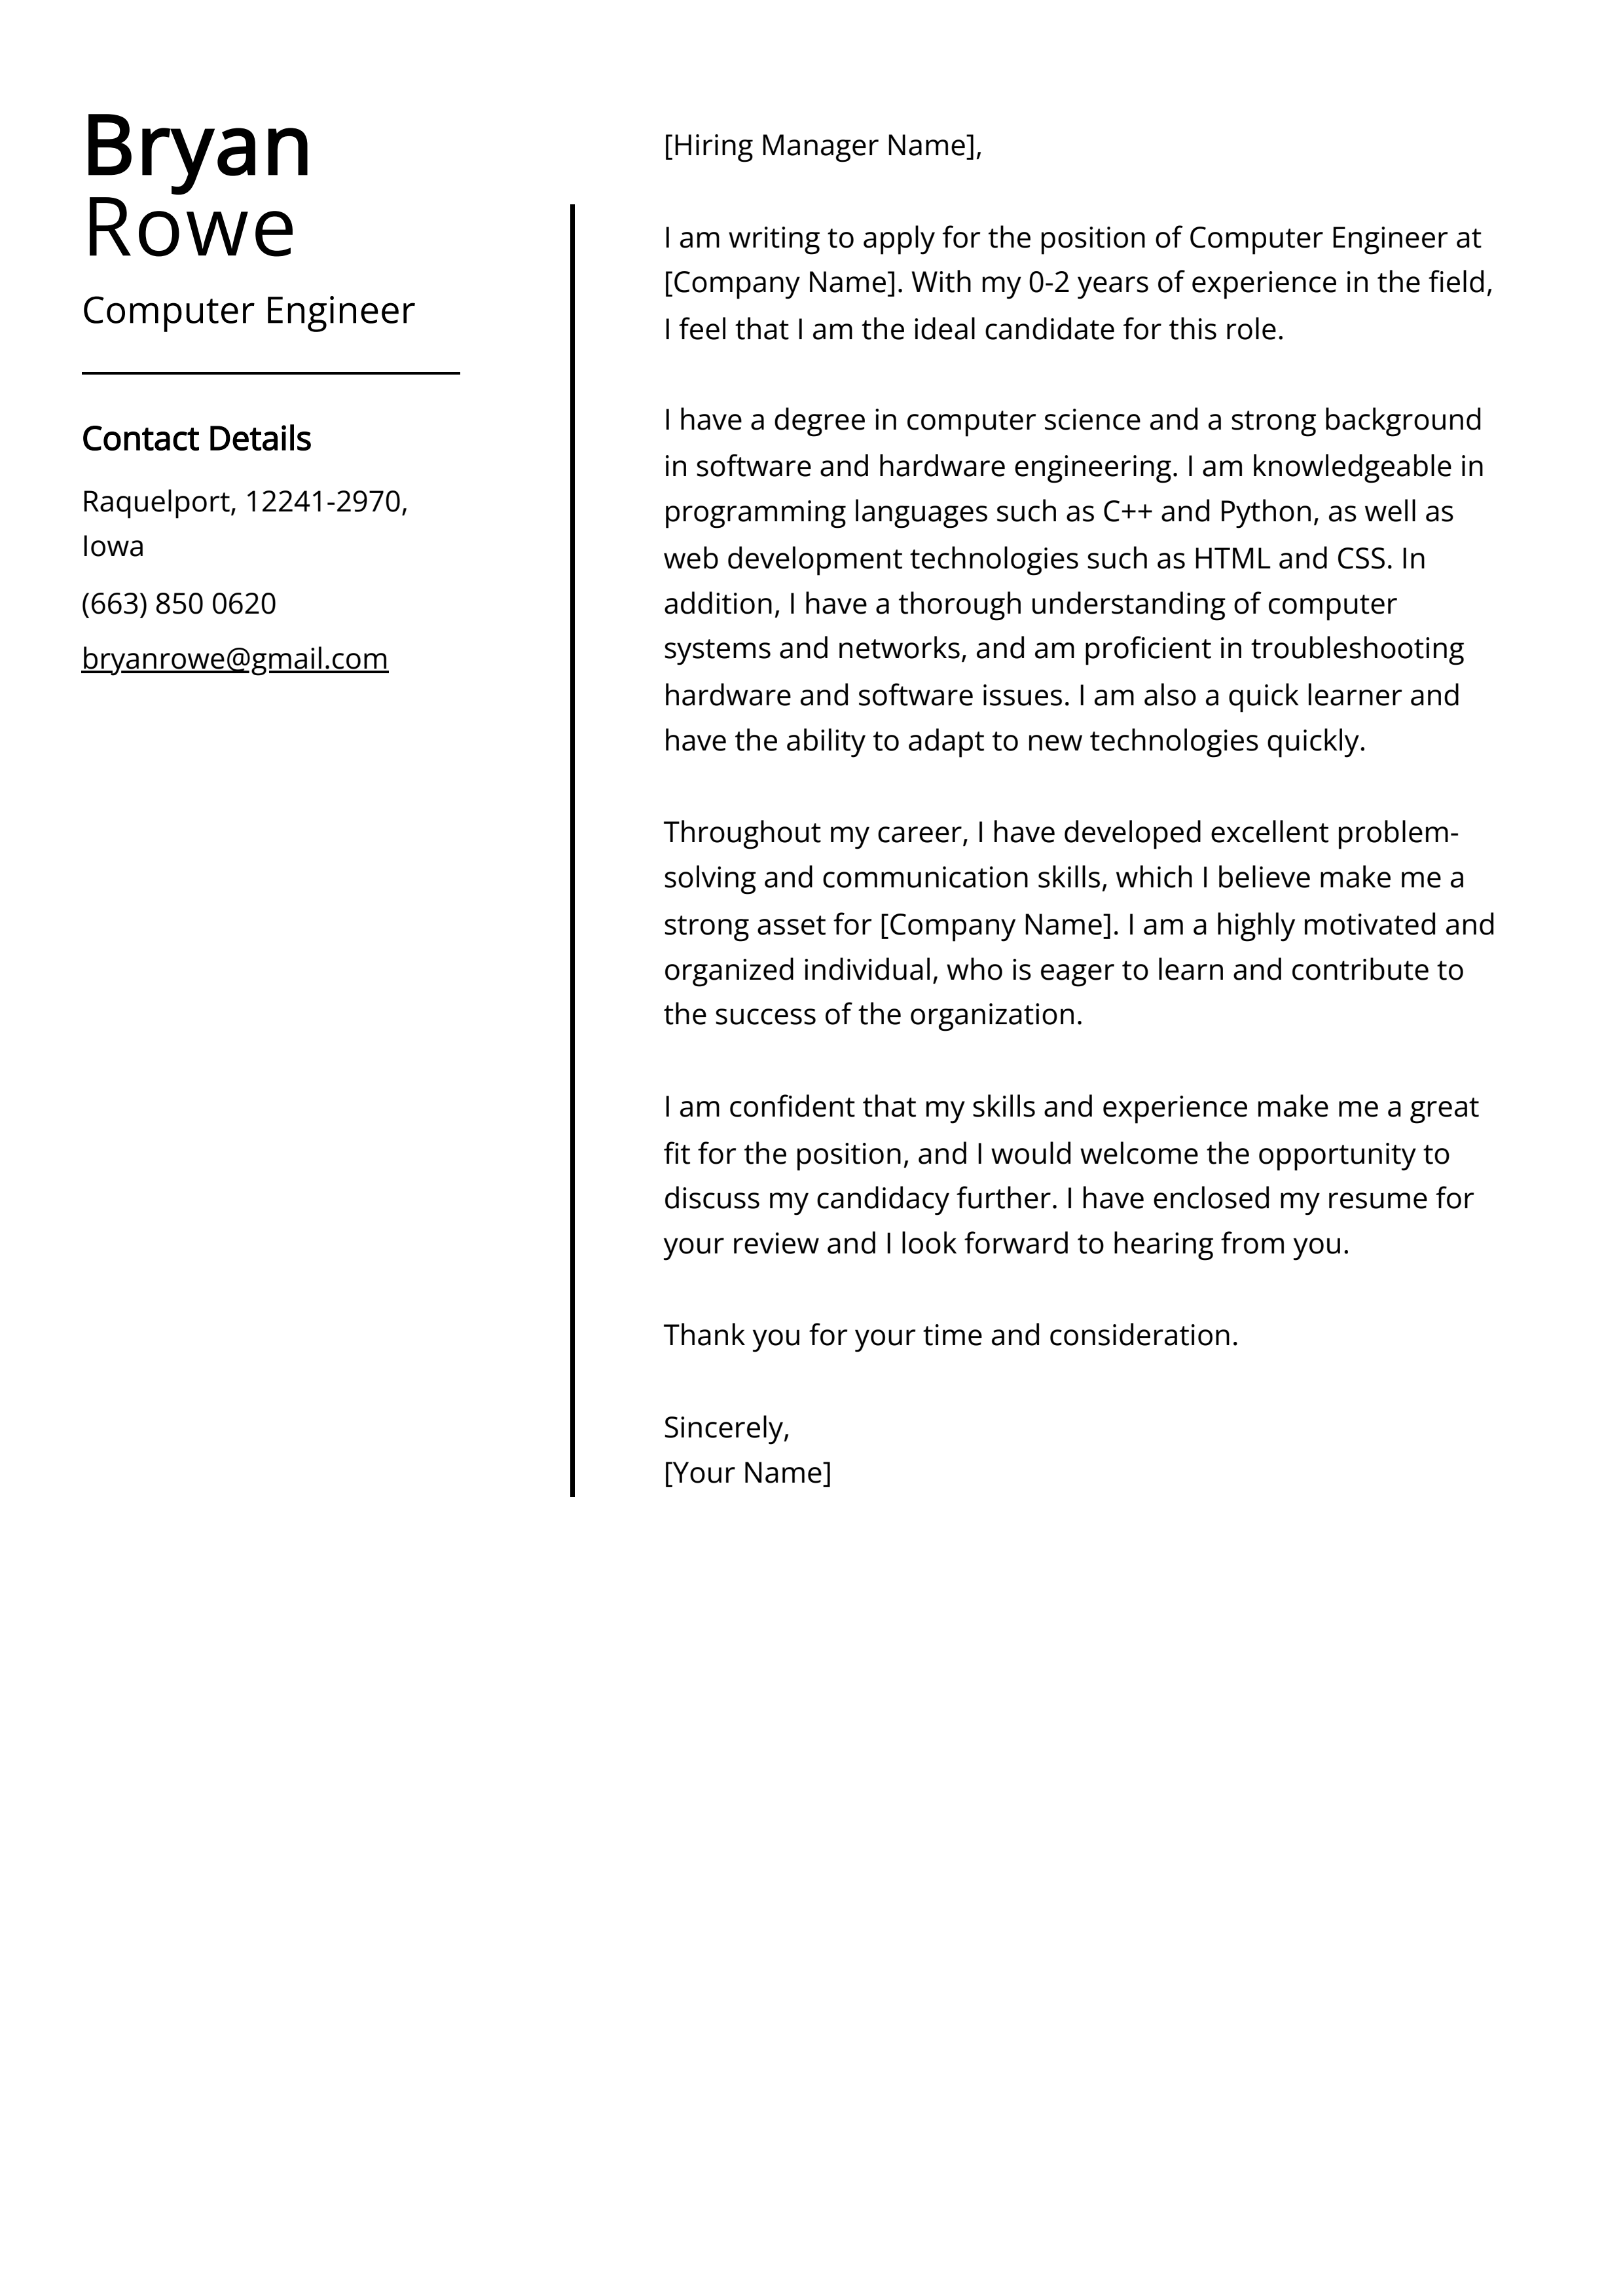 Computer Engineer Cover Letter Example